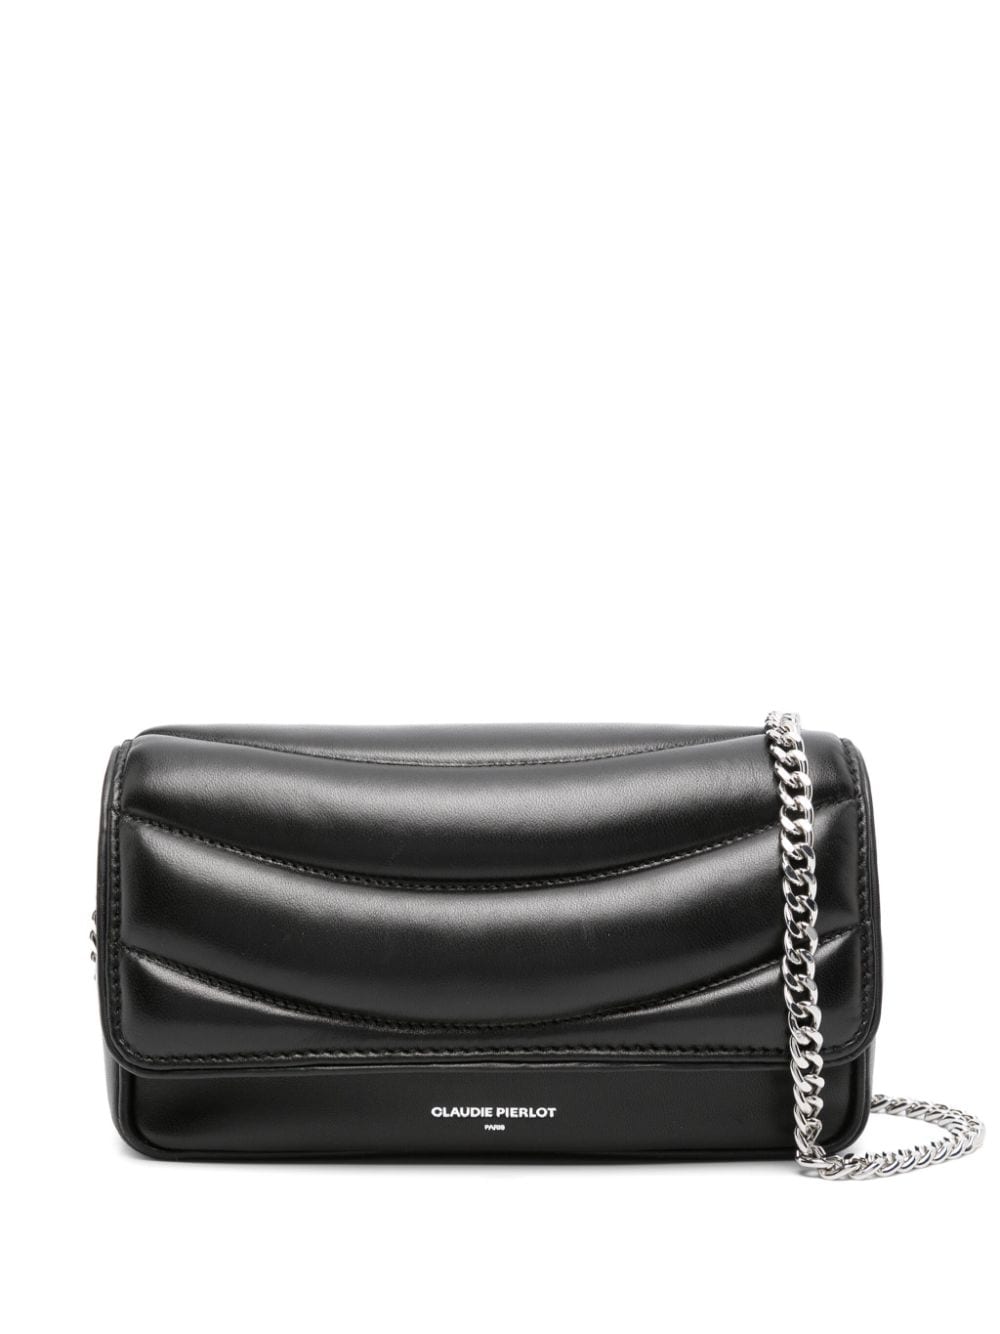 Claudie Pierlot Angelina Quilted Leather Bag In Black